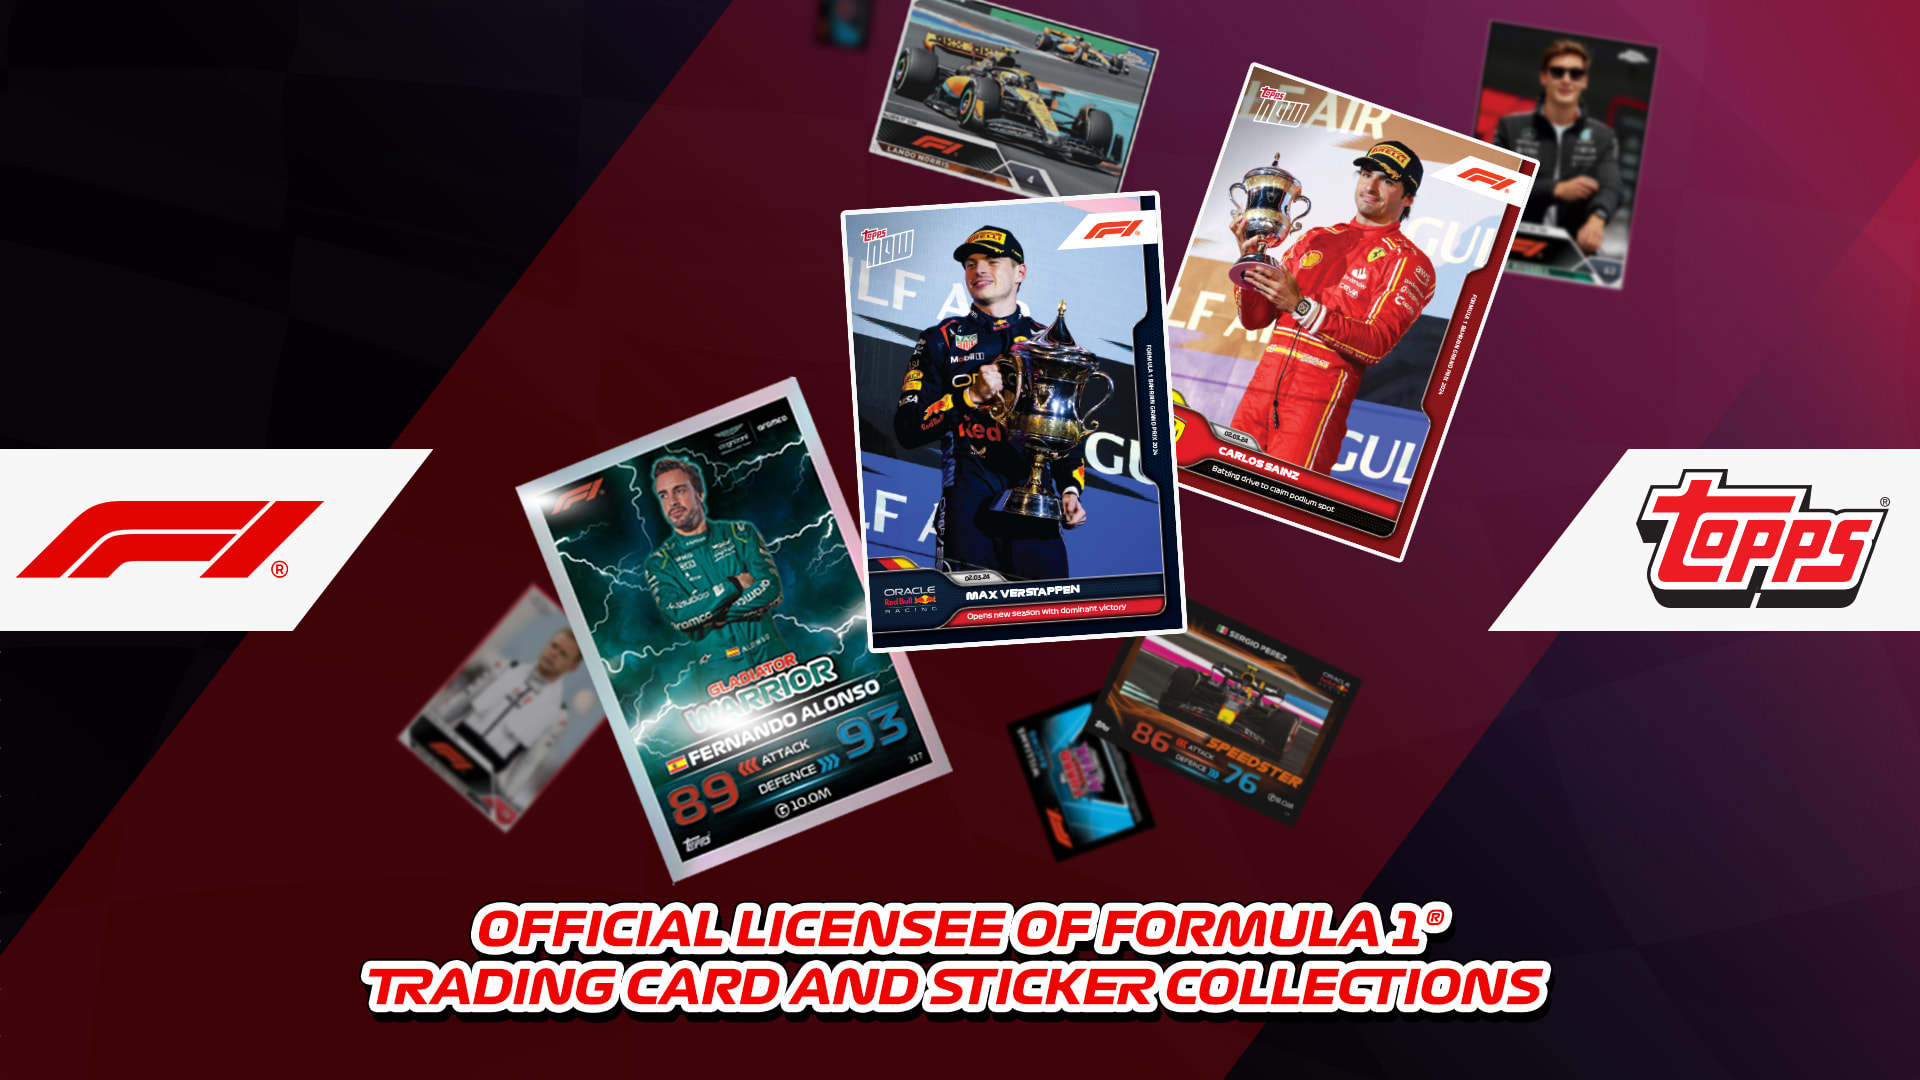 F1 and Topps announce exclusive long-term renewal